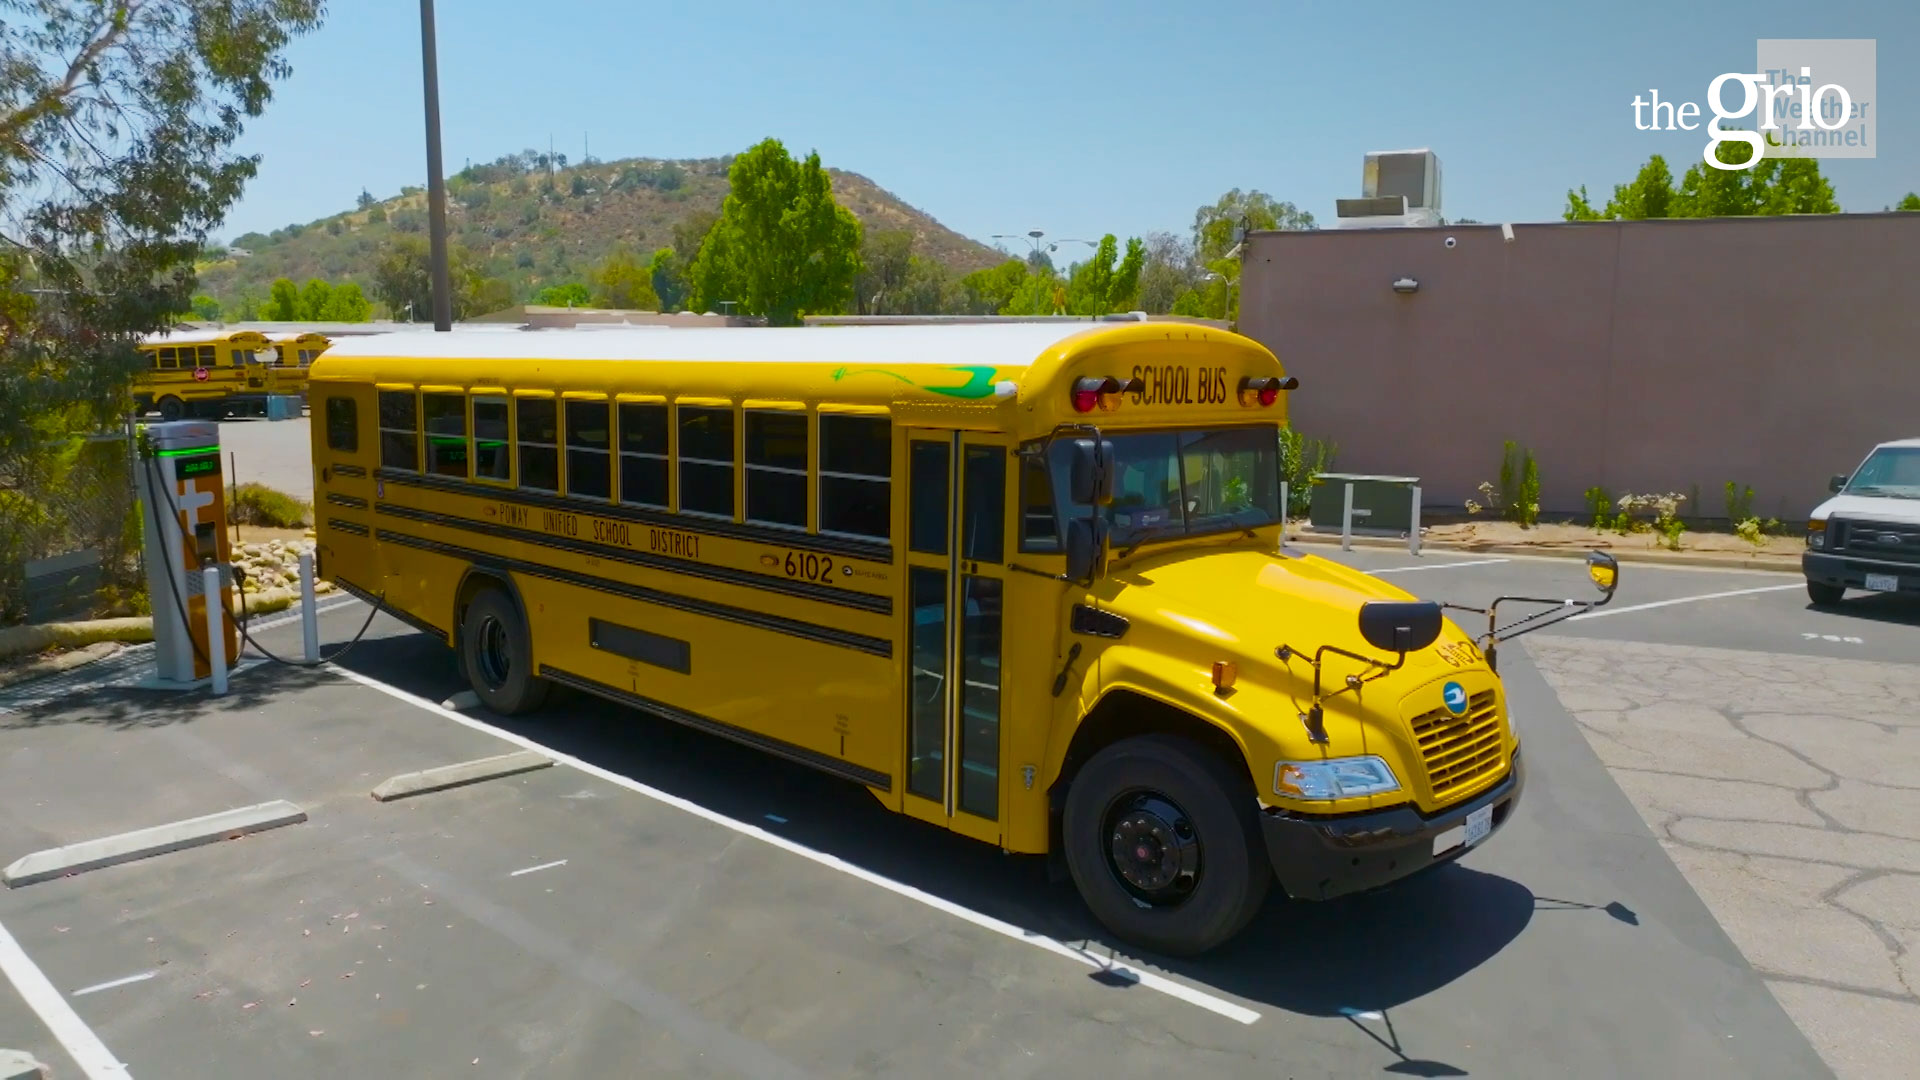 Watch: Electric school buses make way as a new transport alternative